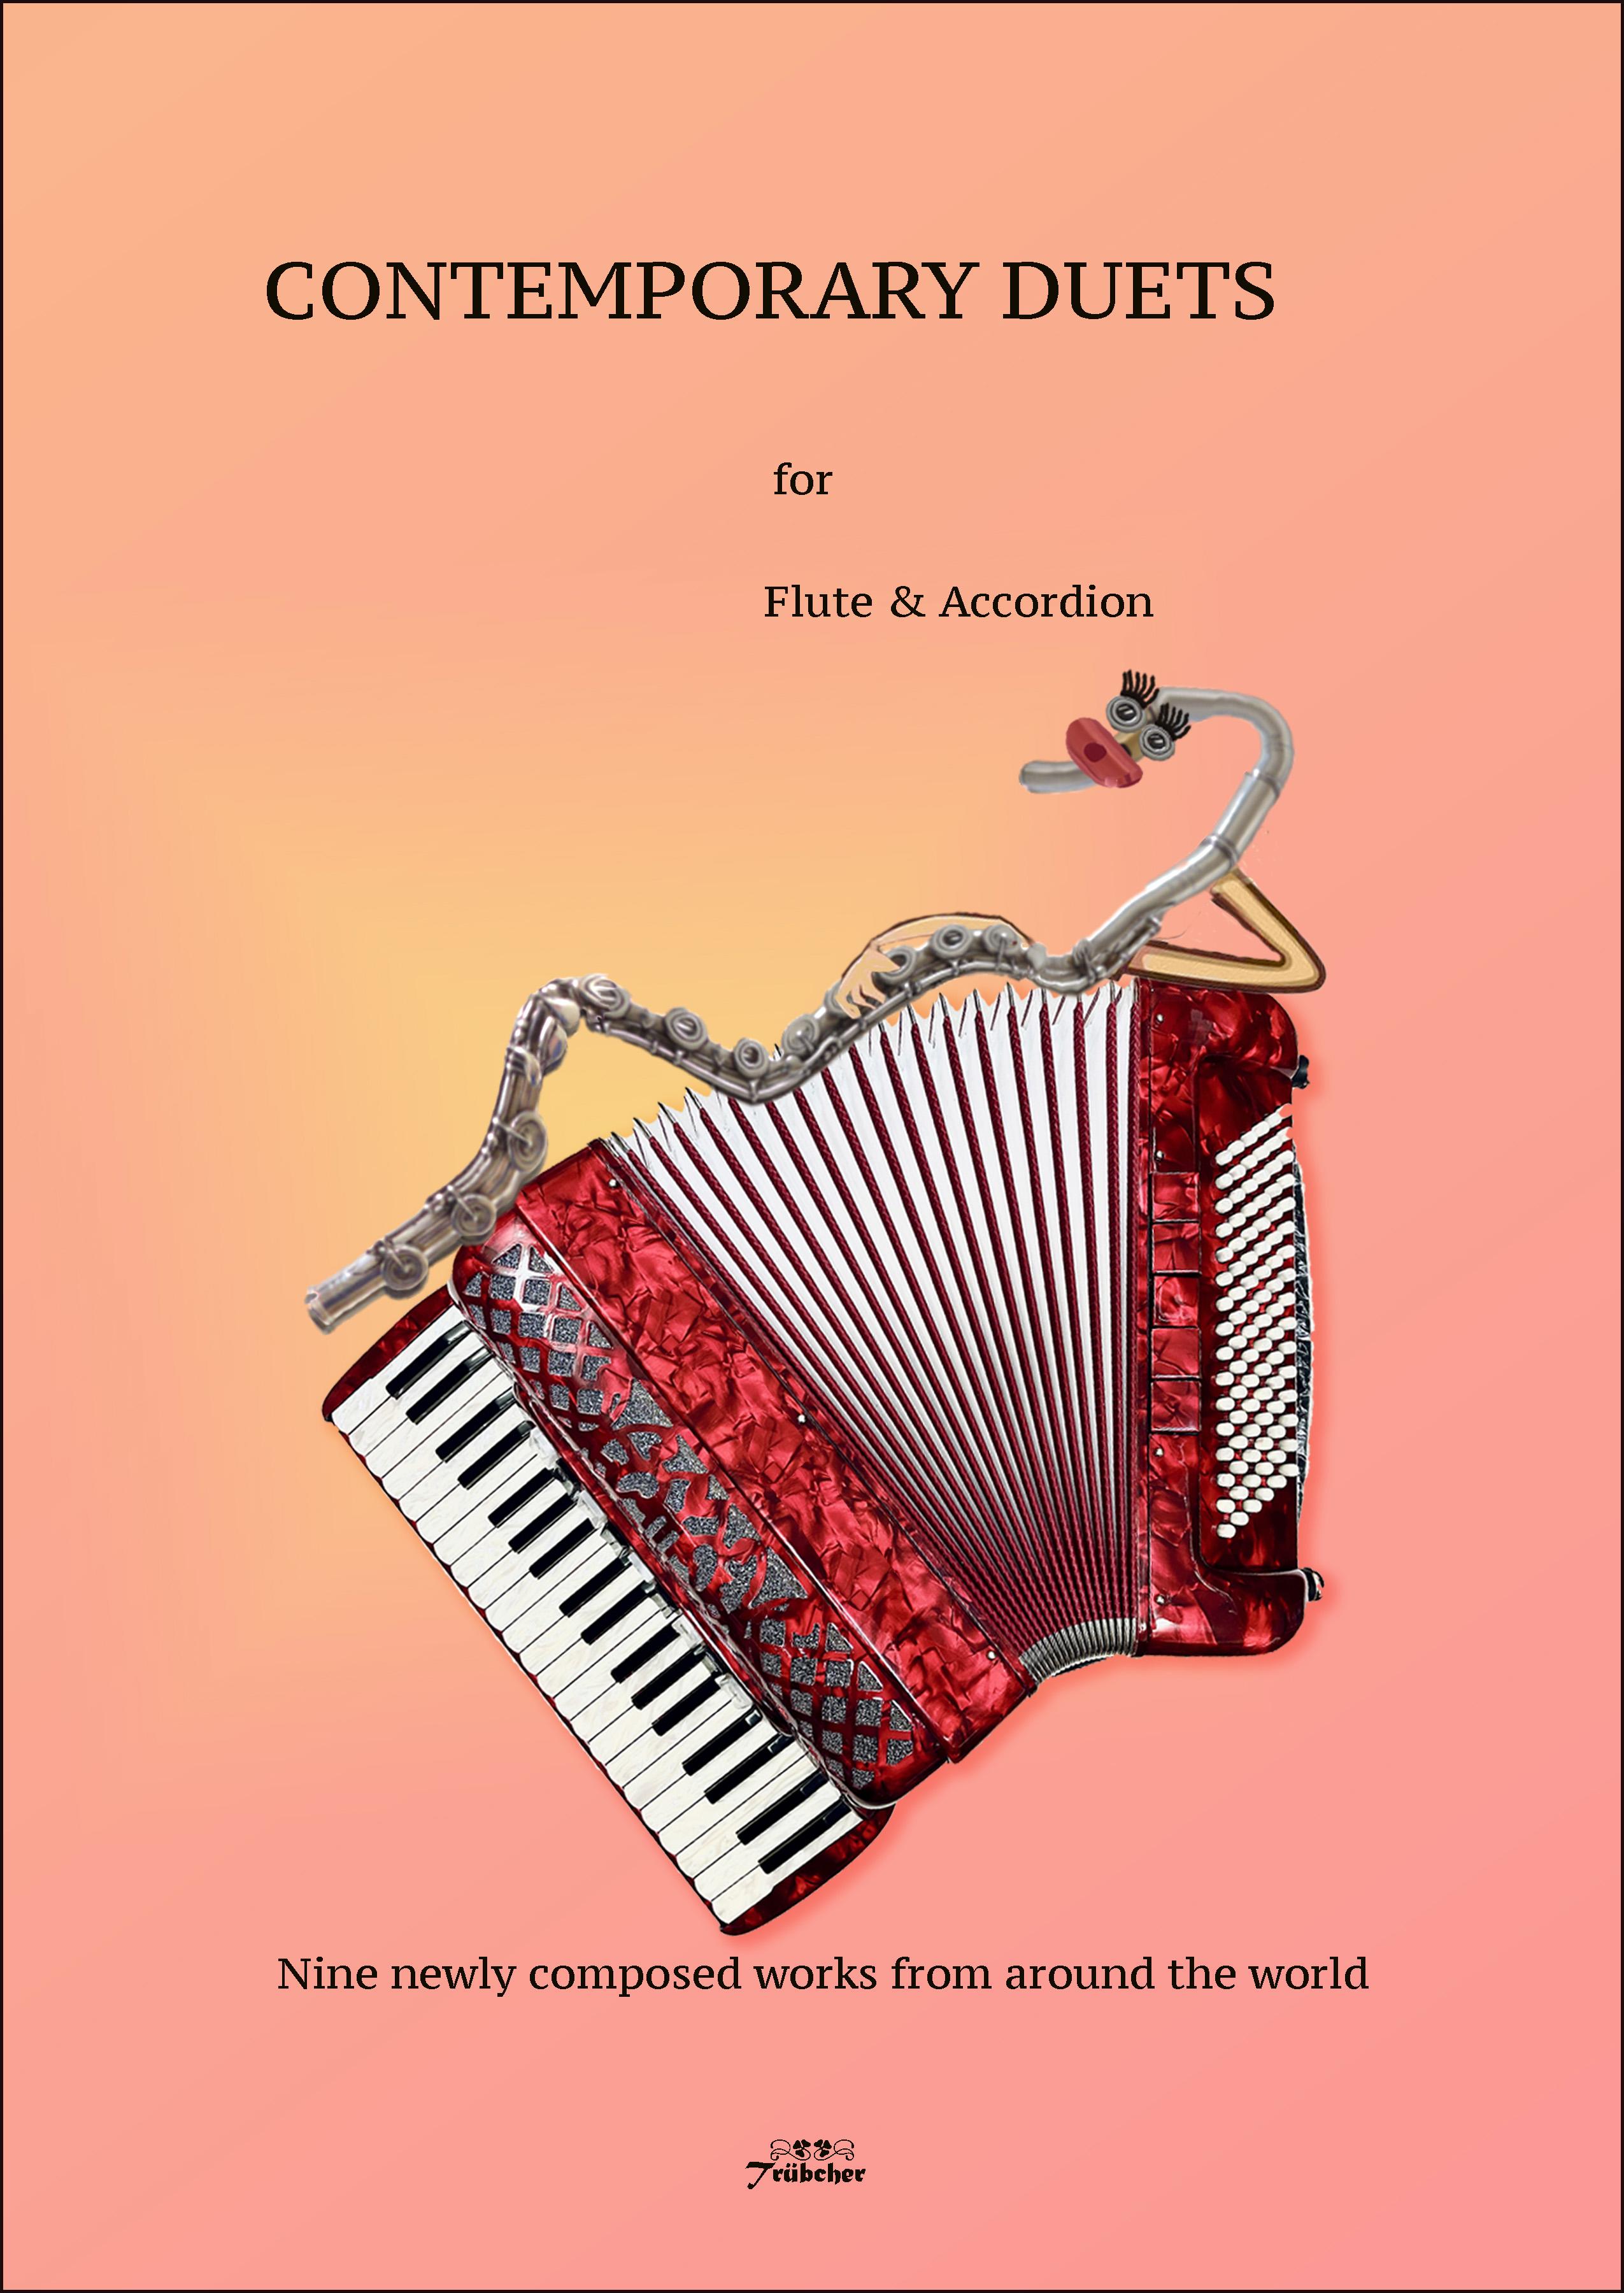 contemporary duets for flute & accordion